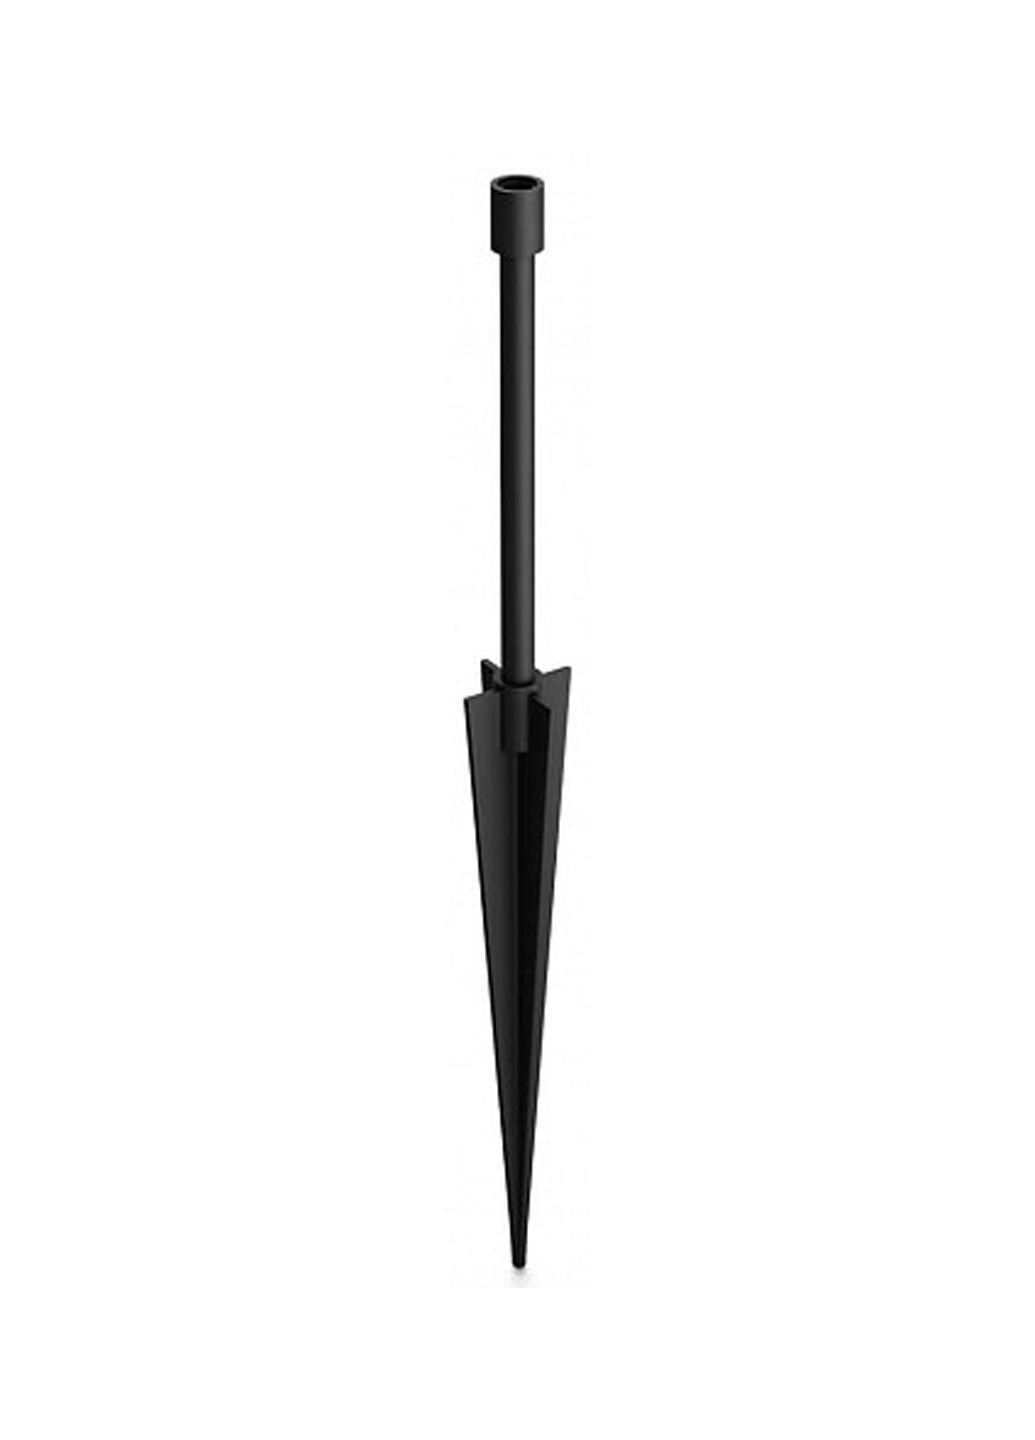 Смарт-светильник Lily spike black 1x8W SELV (17428/30/P7) Philips смарт lily spike black 1x8w selv (17428/30/p7) (142289796)